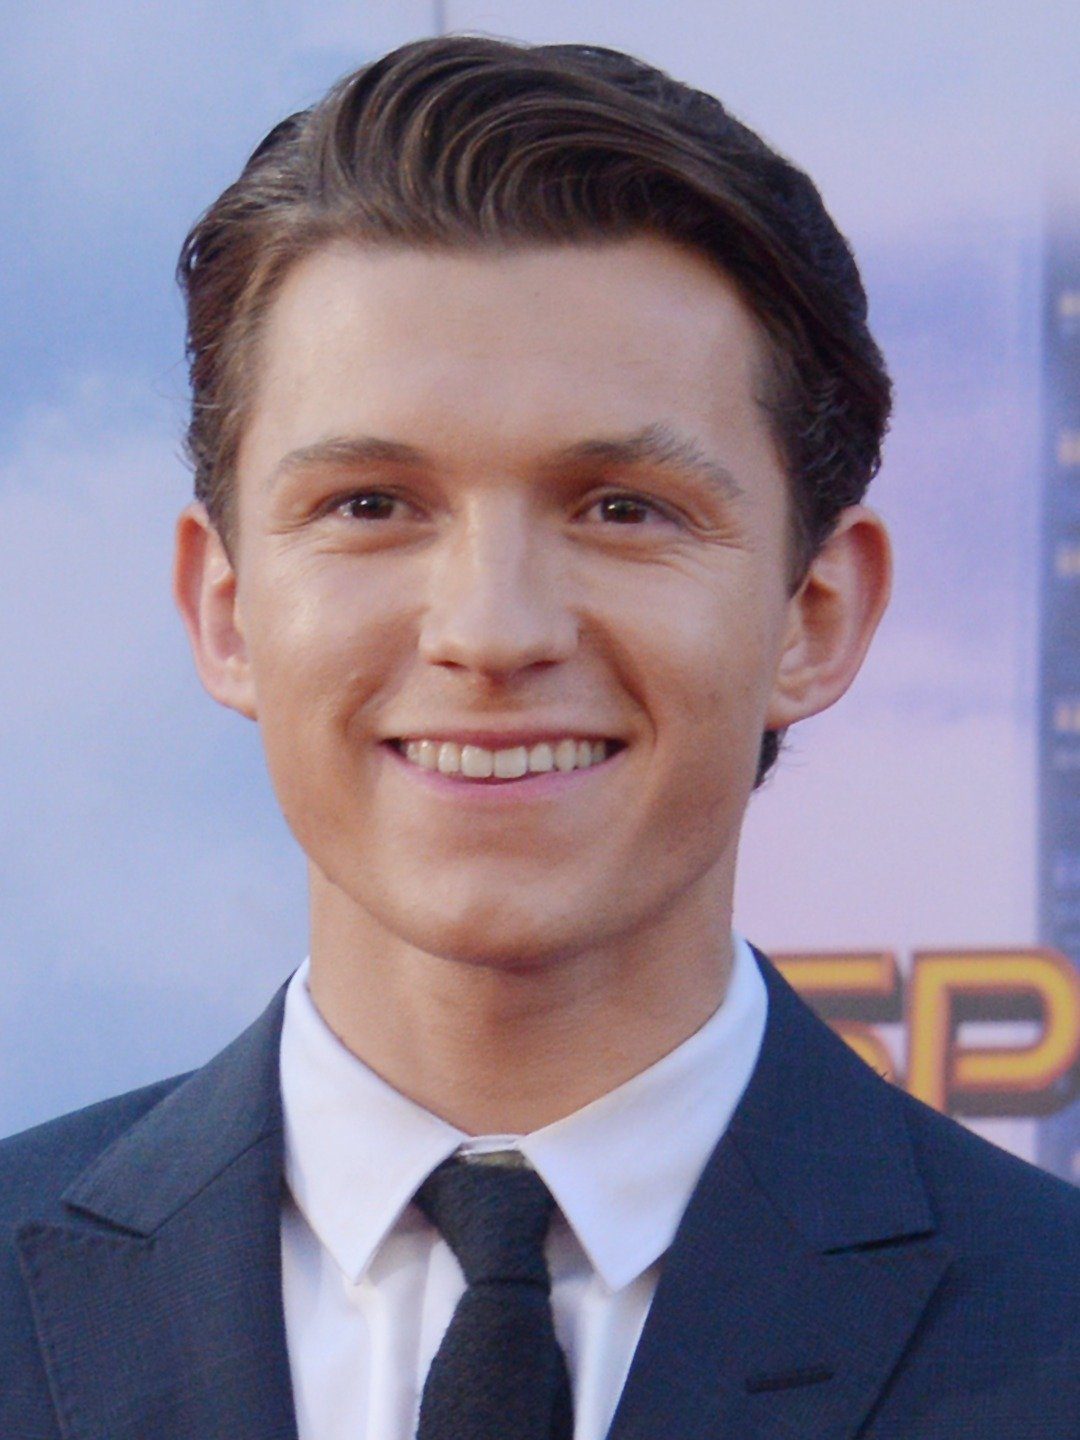 Tom Holland Height Weight Age Body Statistics Biography